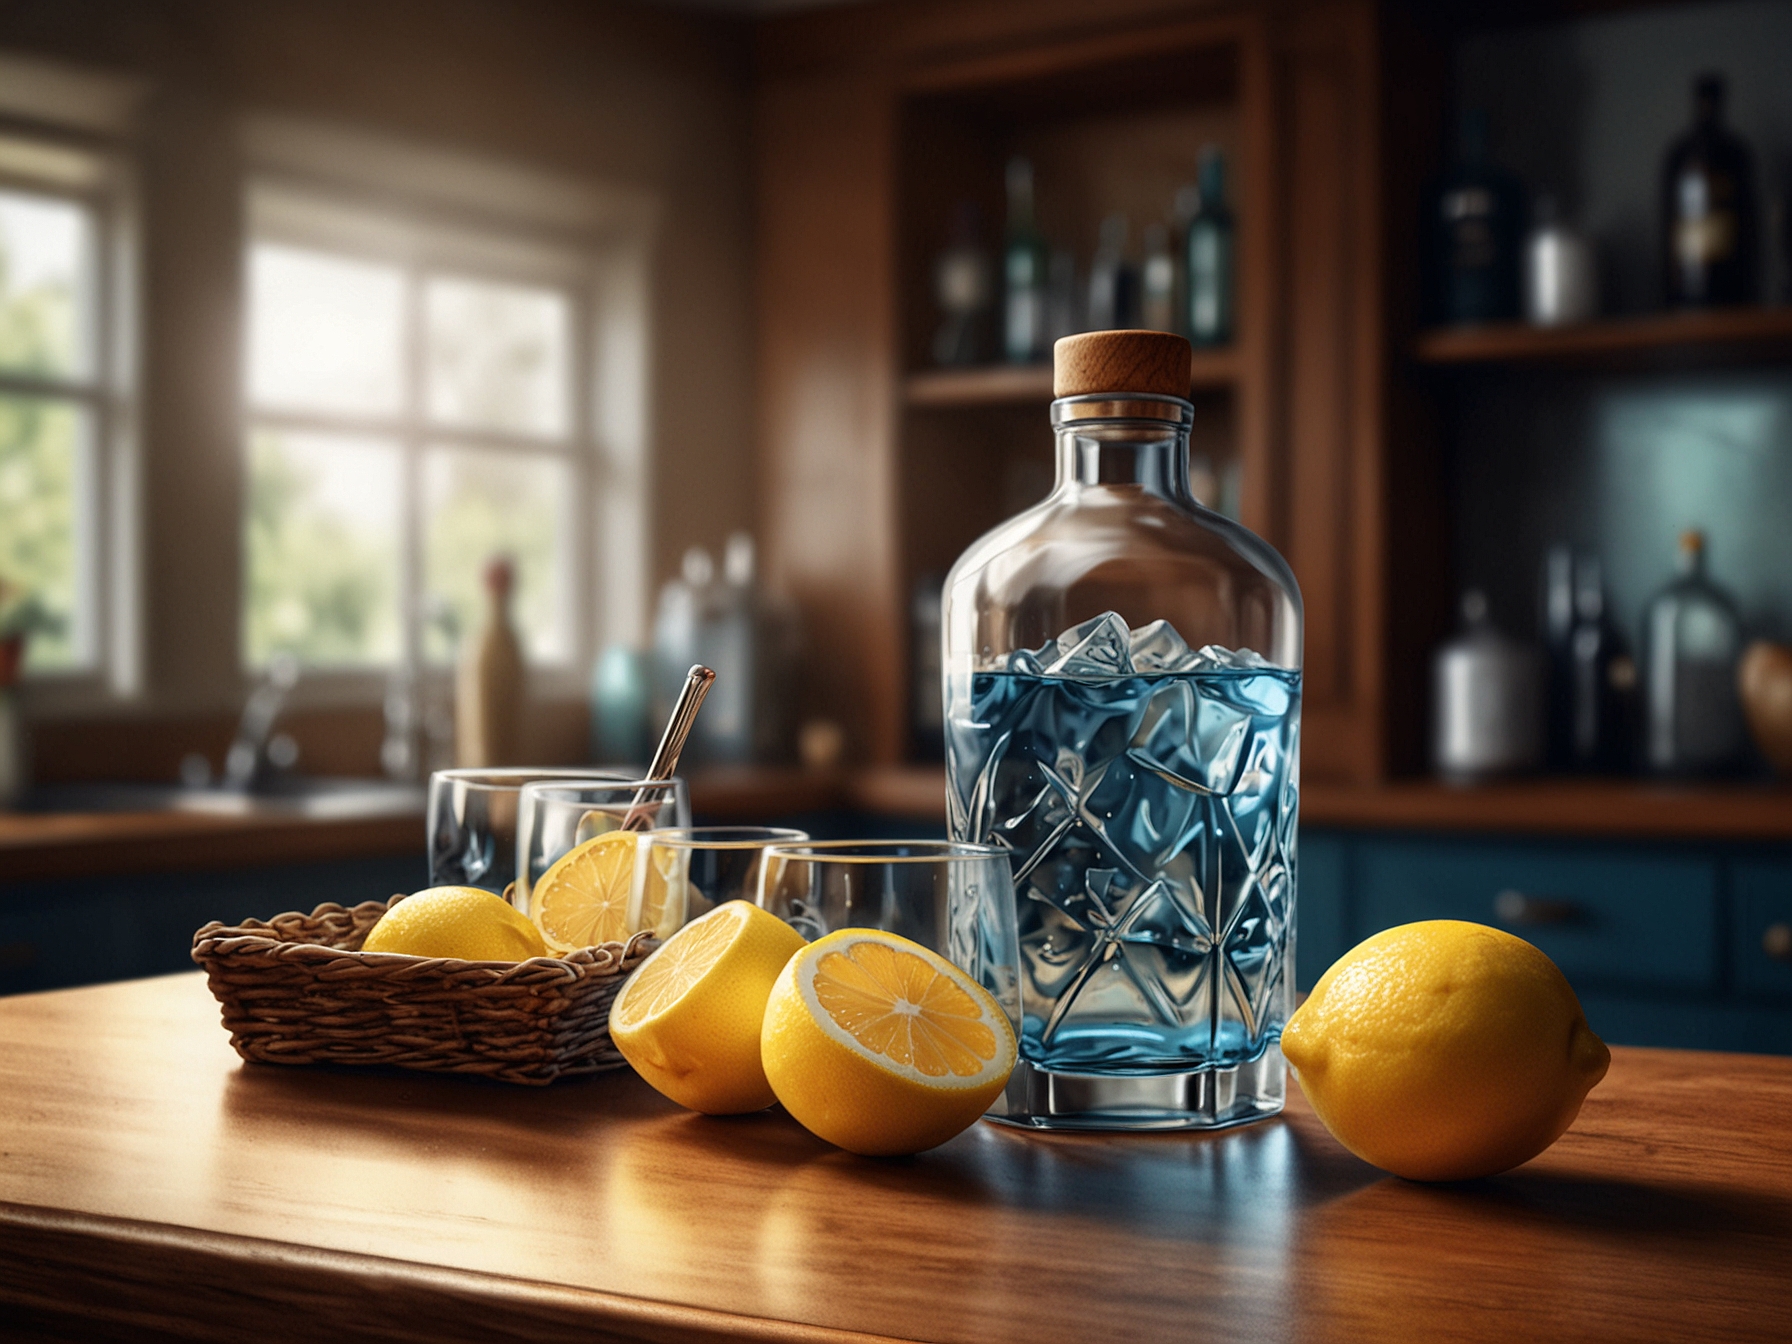 A beautifully set kitchen counter with a basket containing cocktail ingredients, ice, lemons, and a shaker, illustrating the idea of bringing your own drinks to the party.